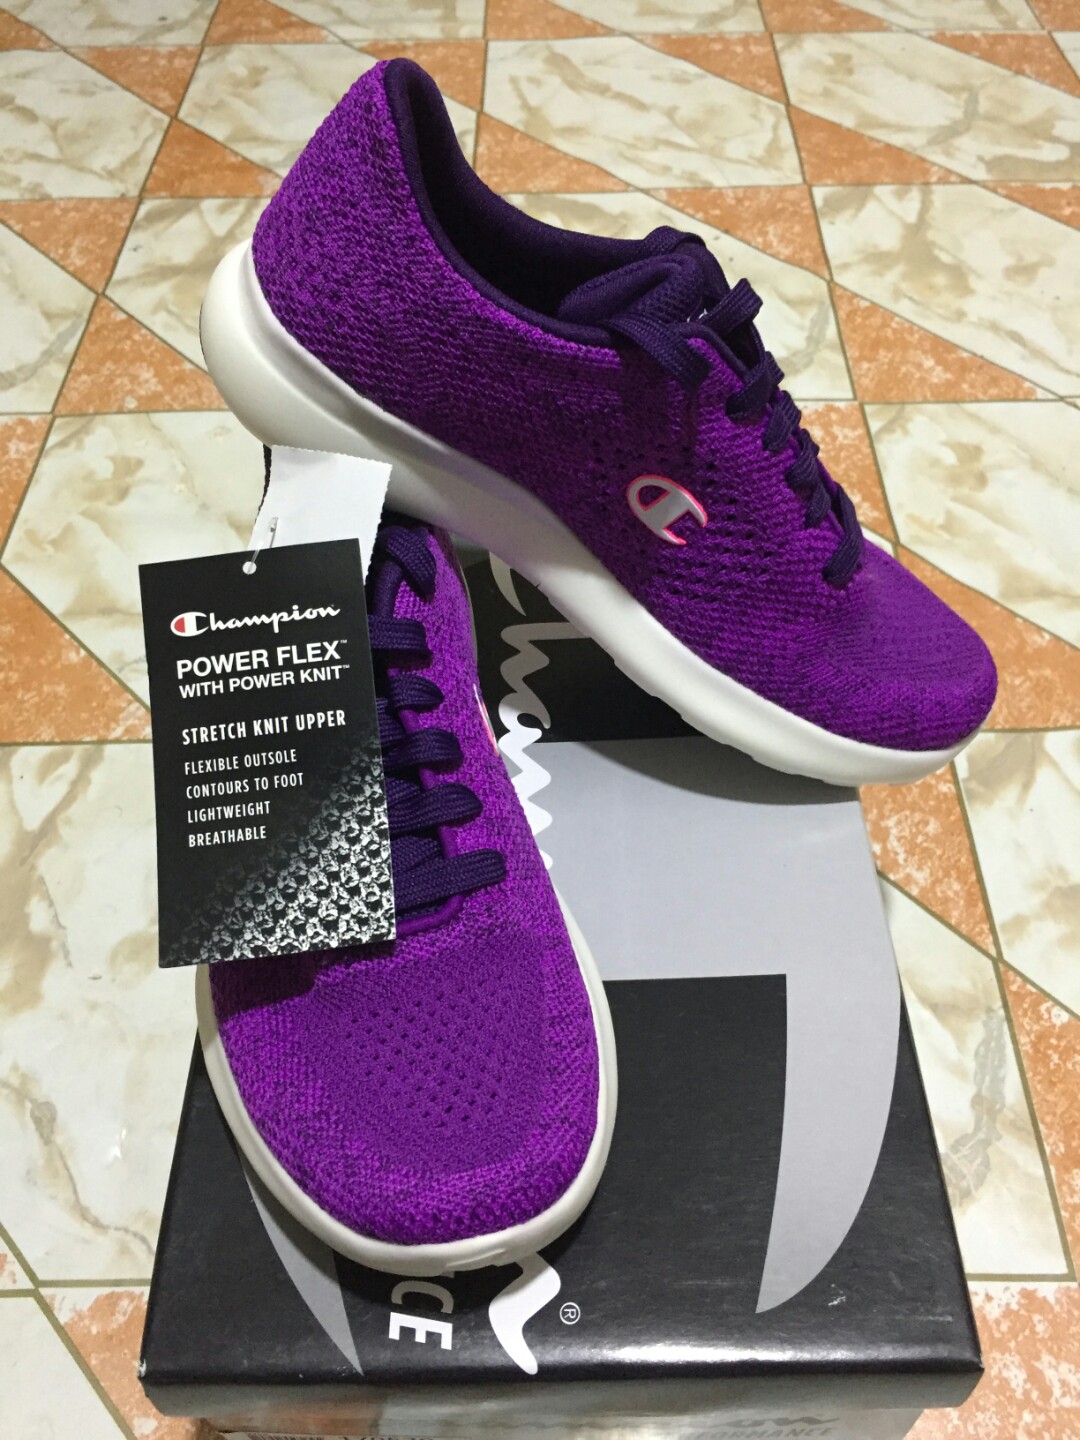 BRANDNEW PAYLESS SHOES CHAMPION POWER 